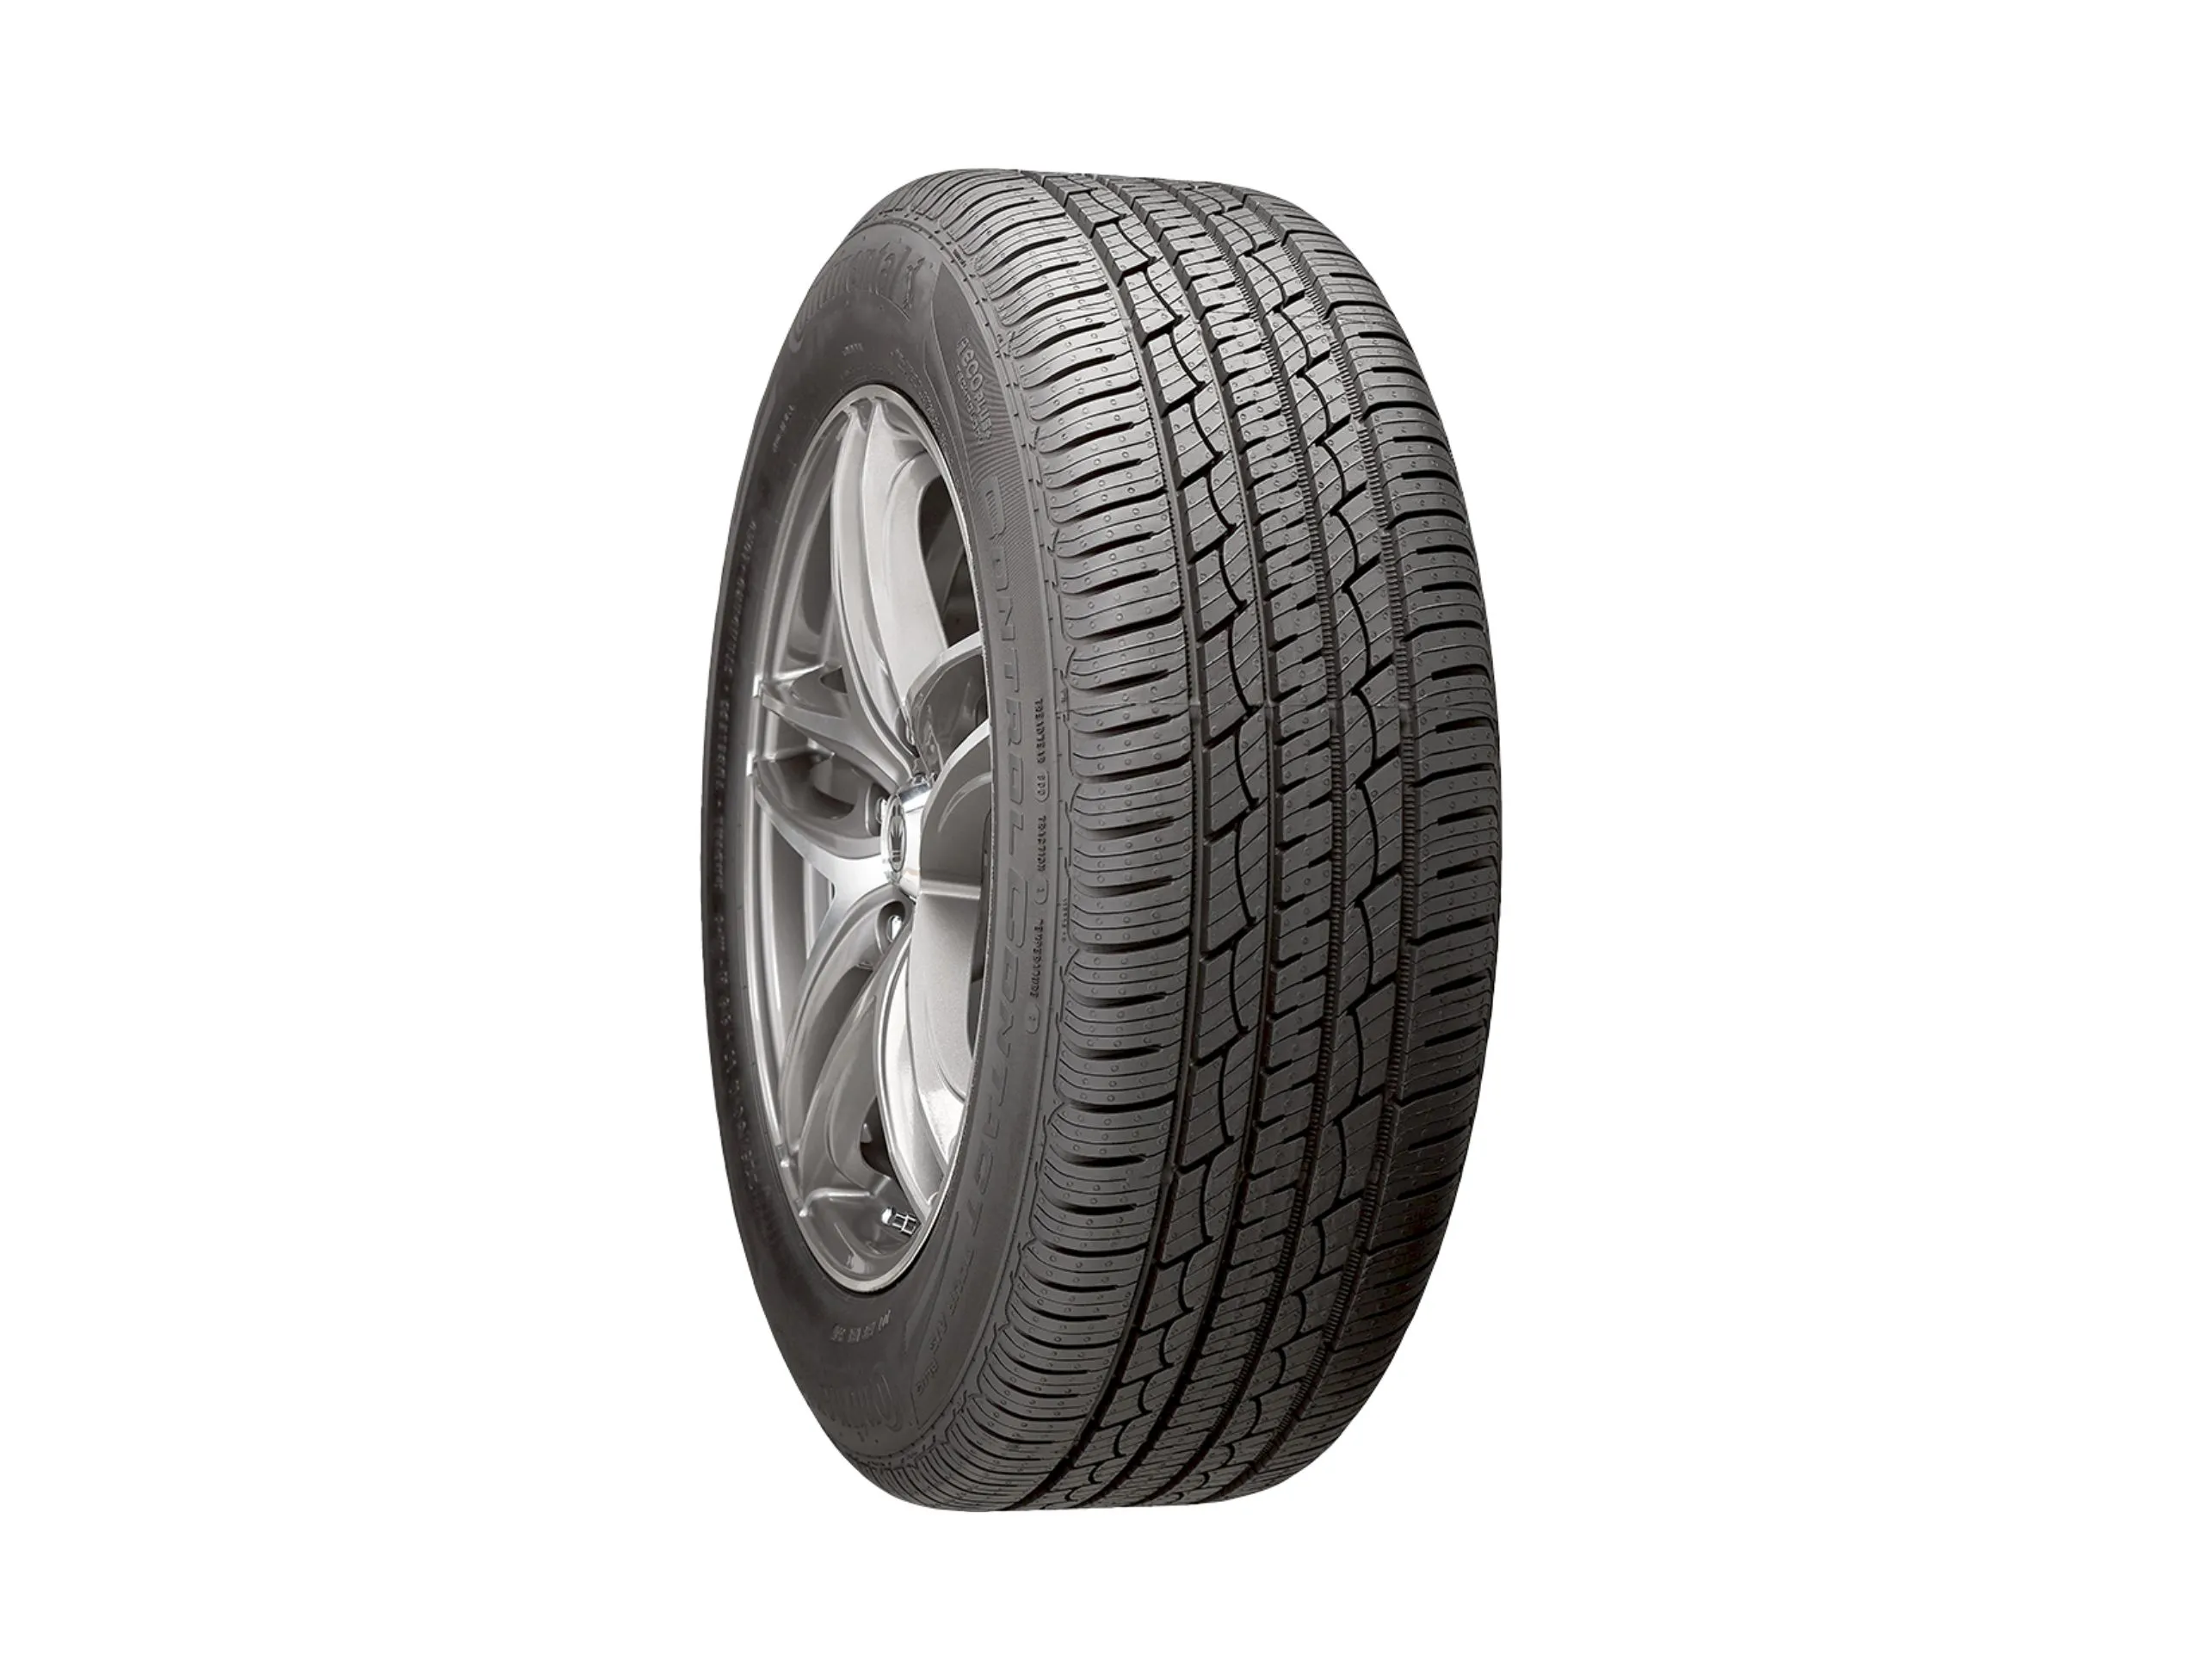 Contact A/S 185/65 Alloys N Tire - Tour Tires Control 86H Plus R14 Continental